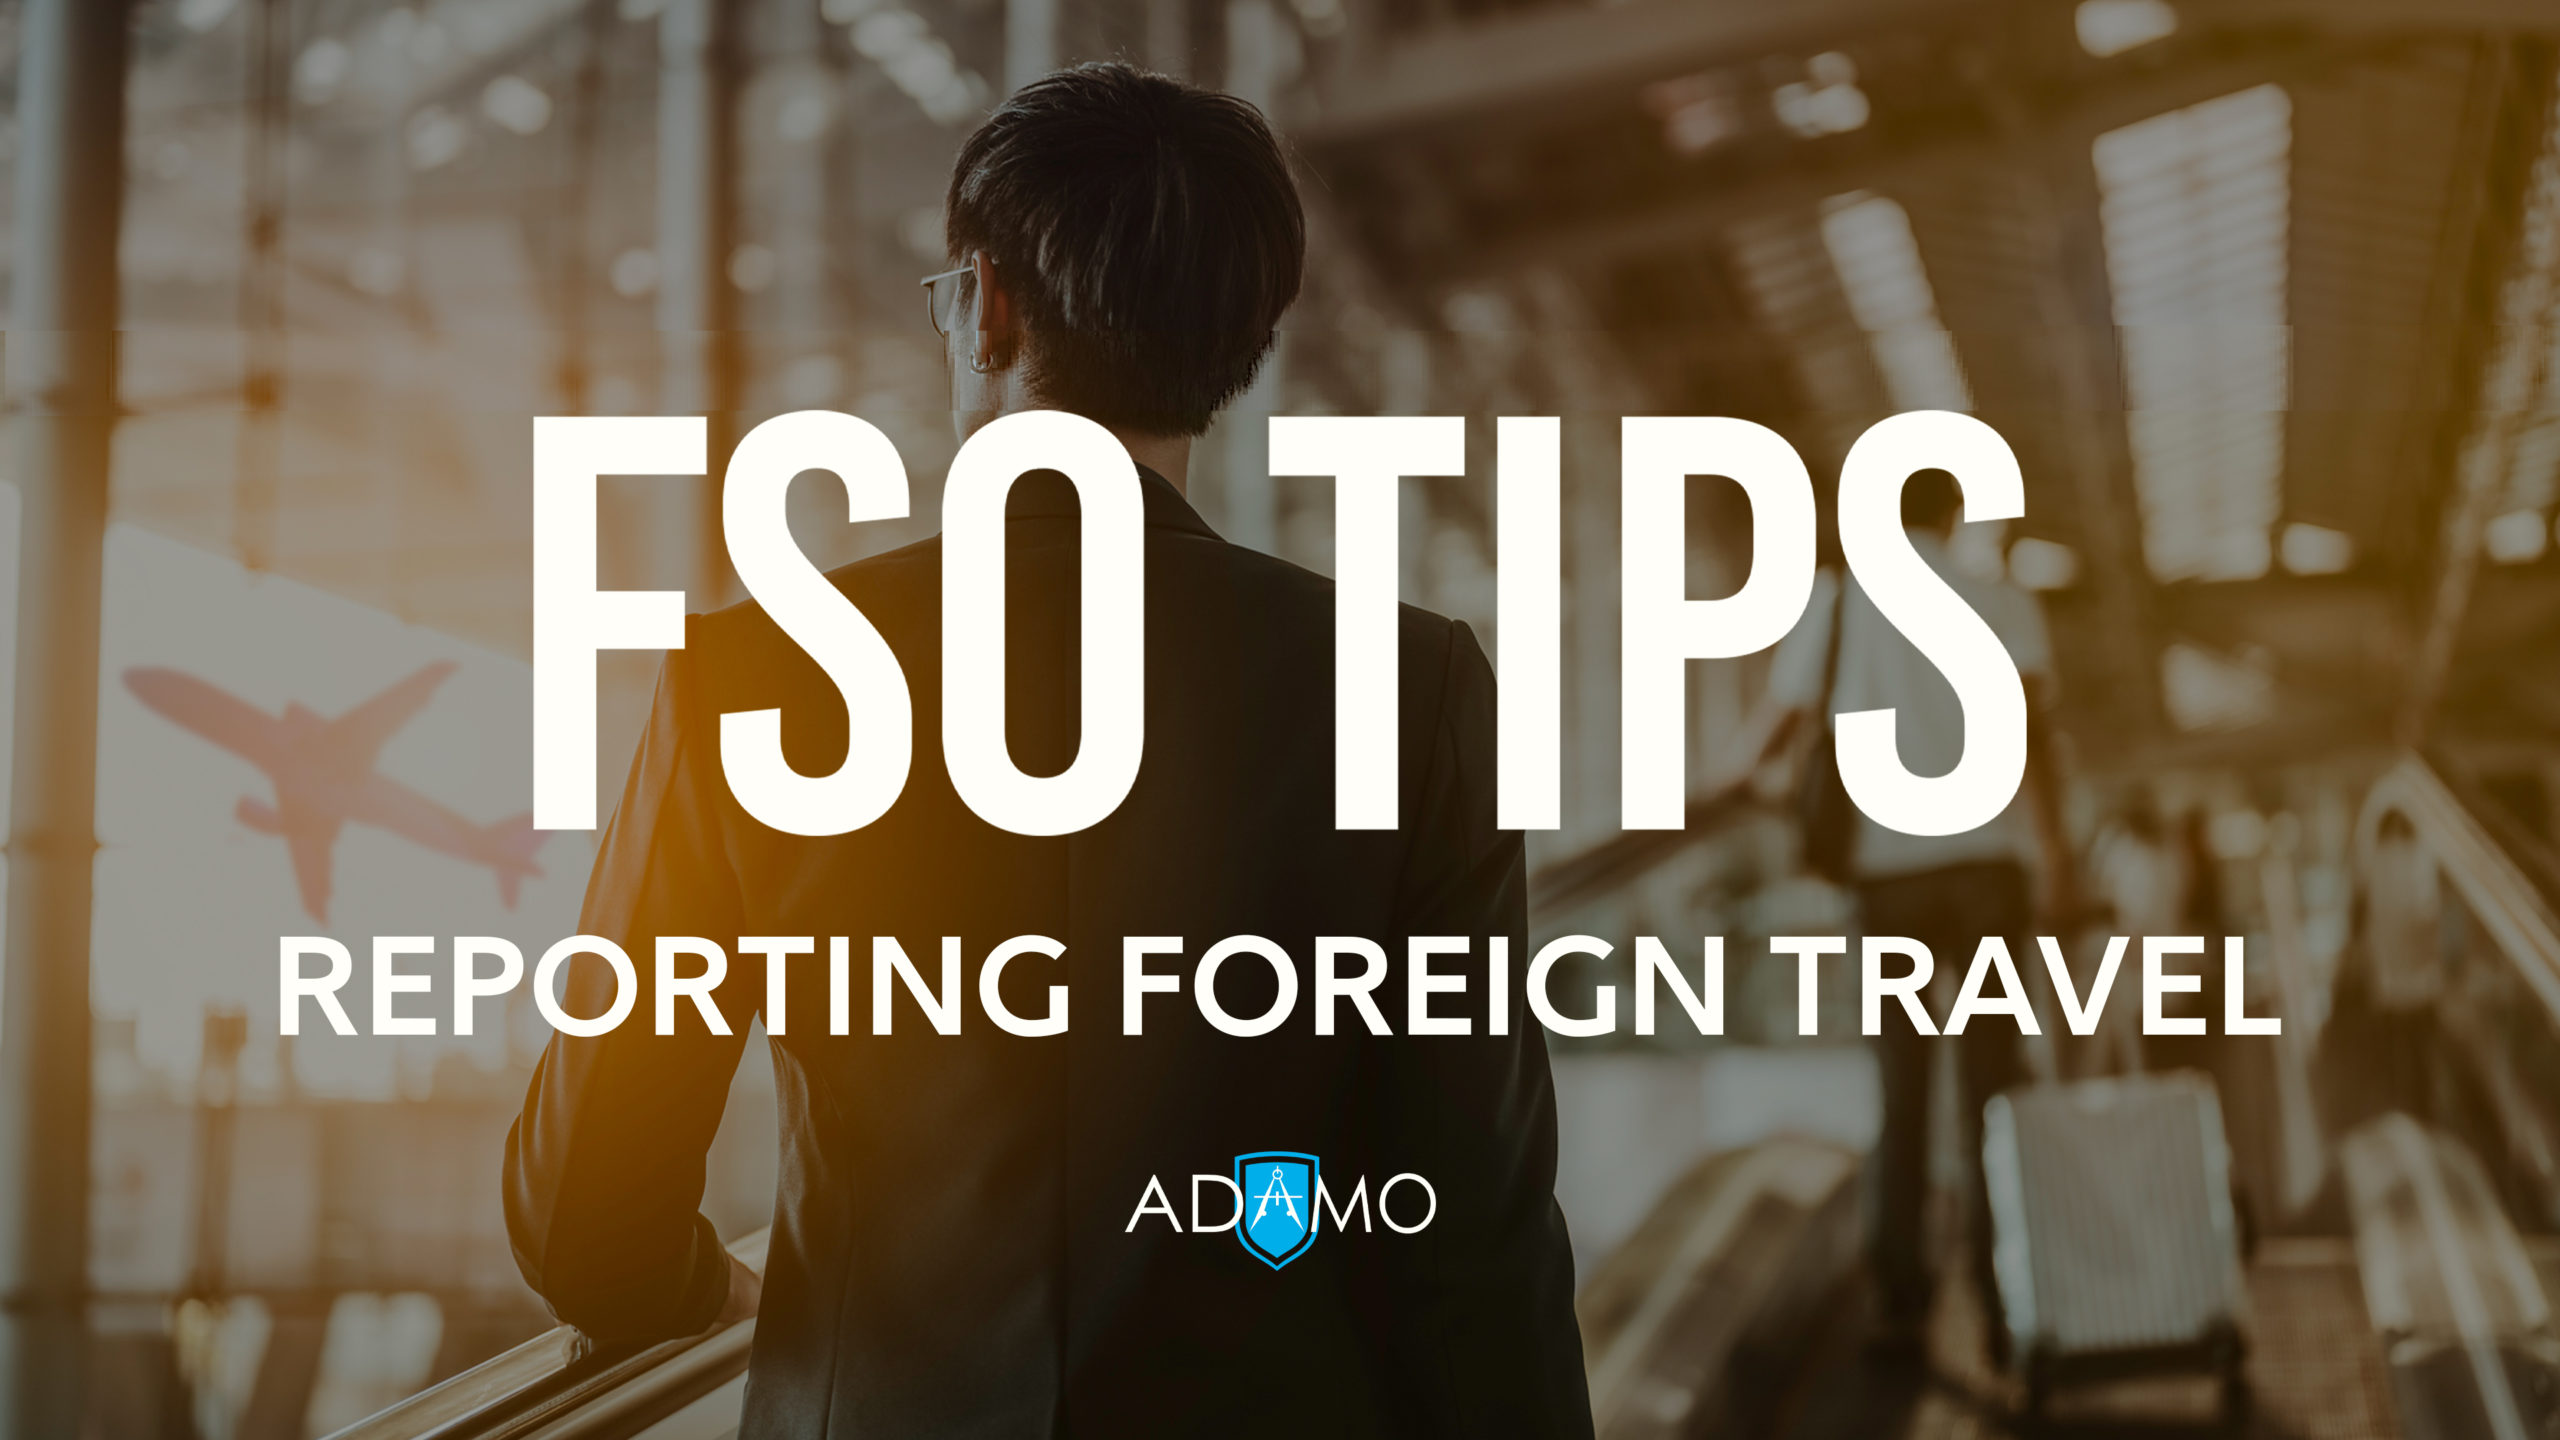 FSO Tips Reporting Foreign Travel written over an image of a man in an airport